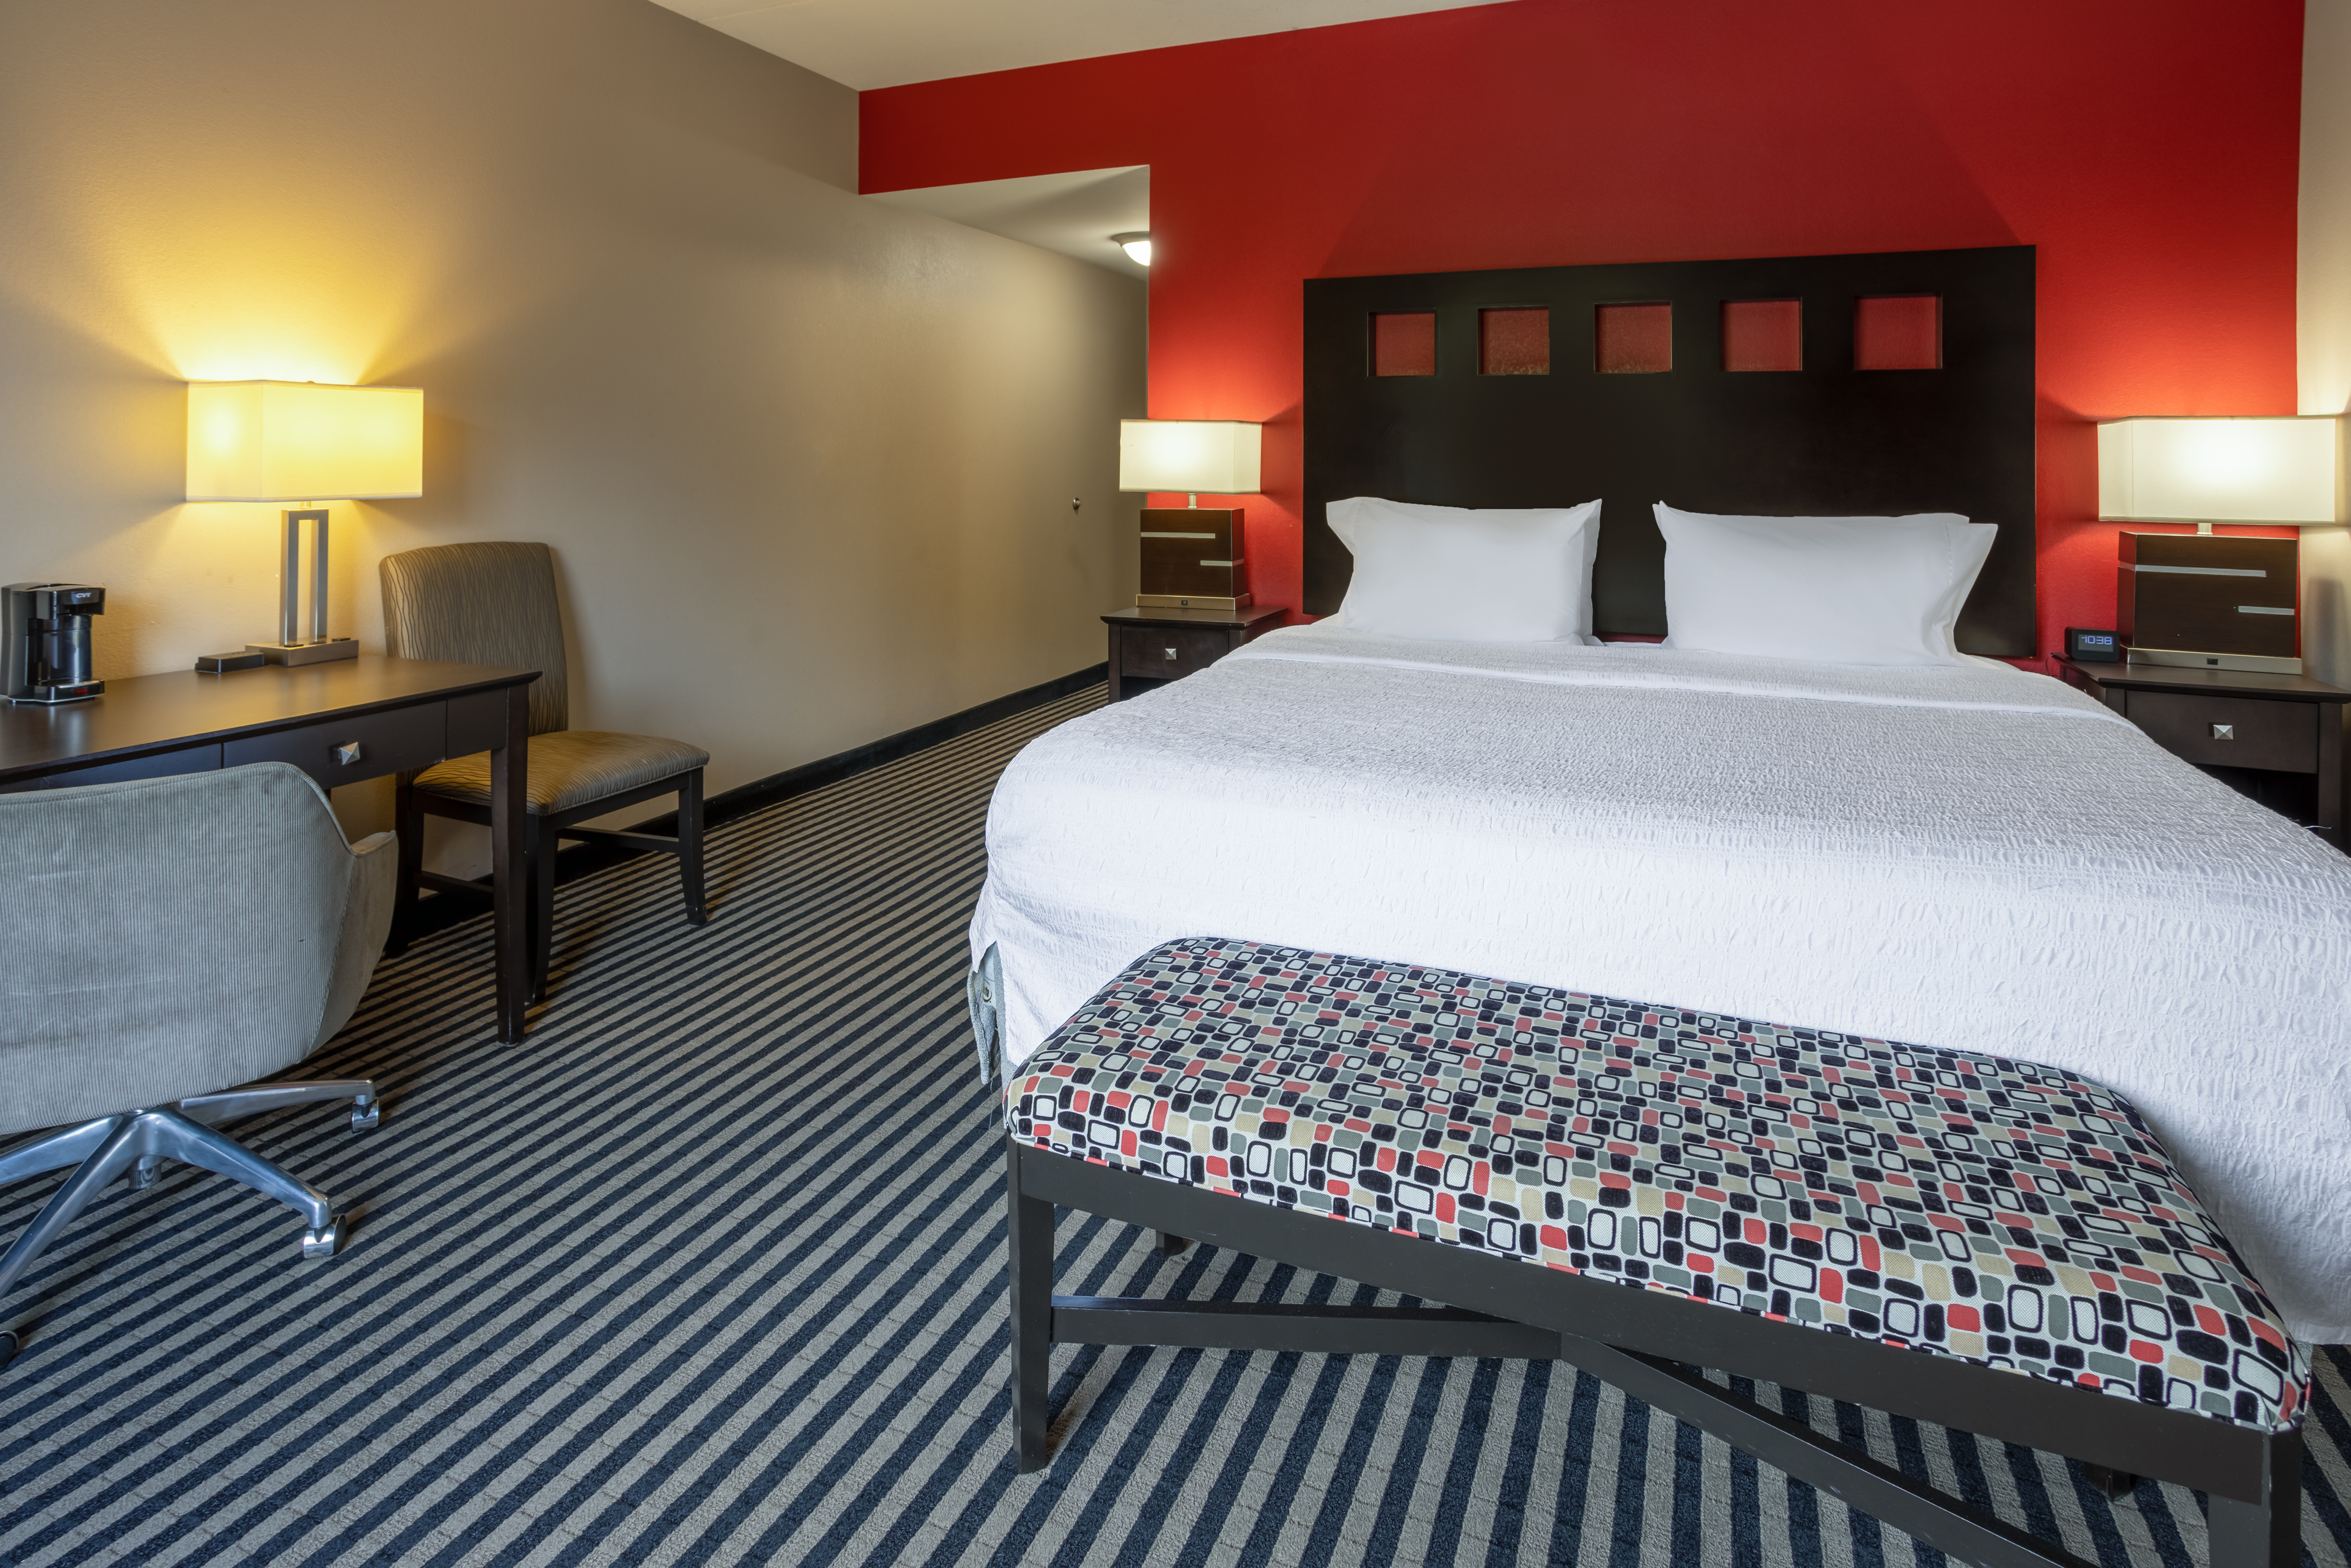 Our modern rooms have soft, cozy bedding